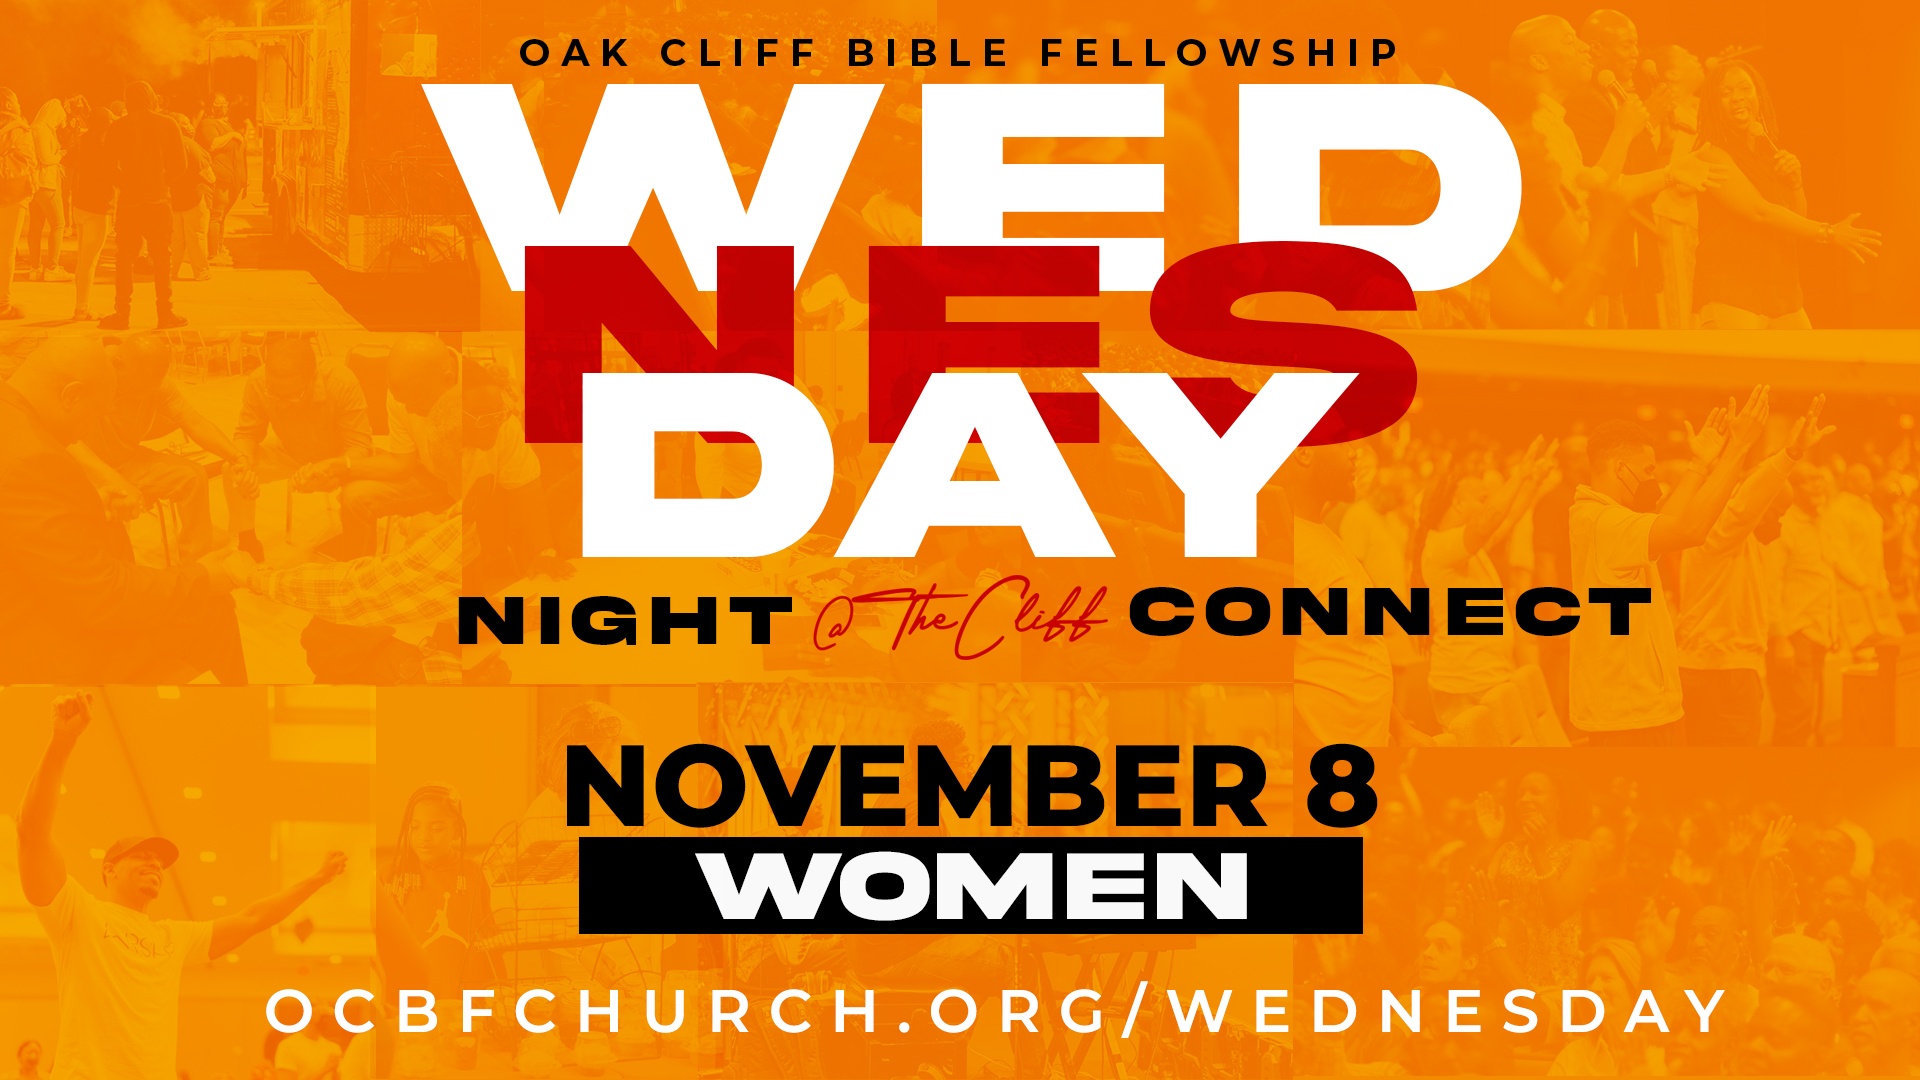 Wednesday night connect for women